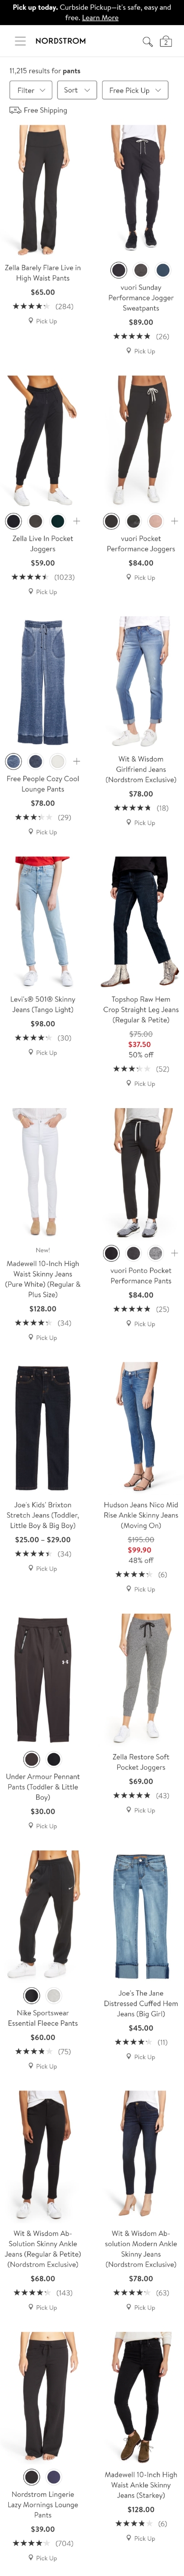 nordstrom search result page mobile